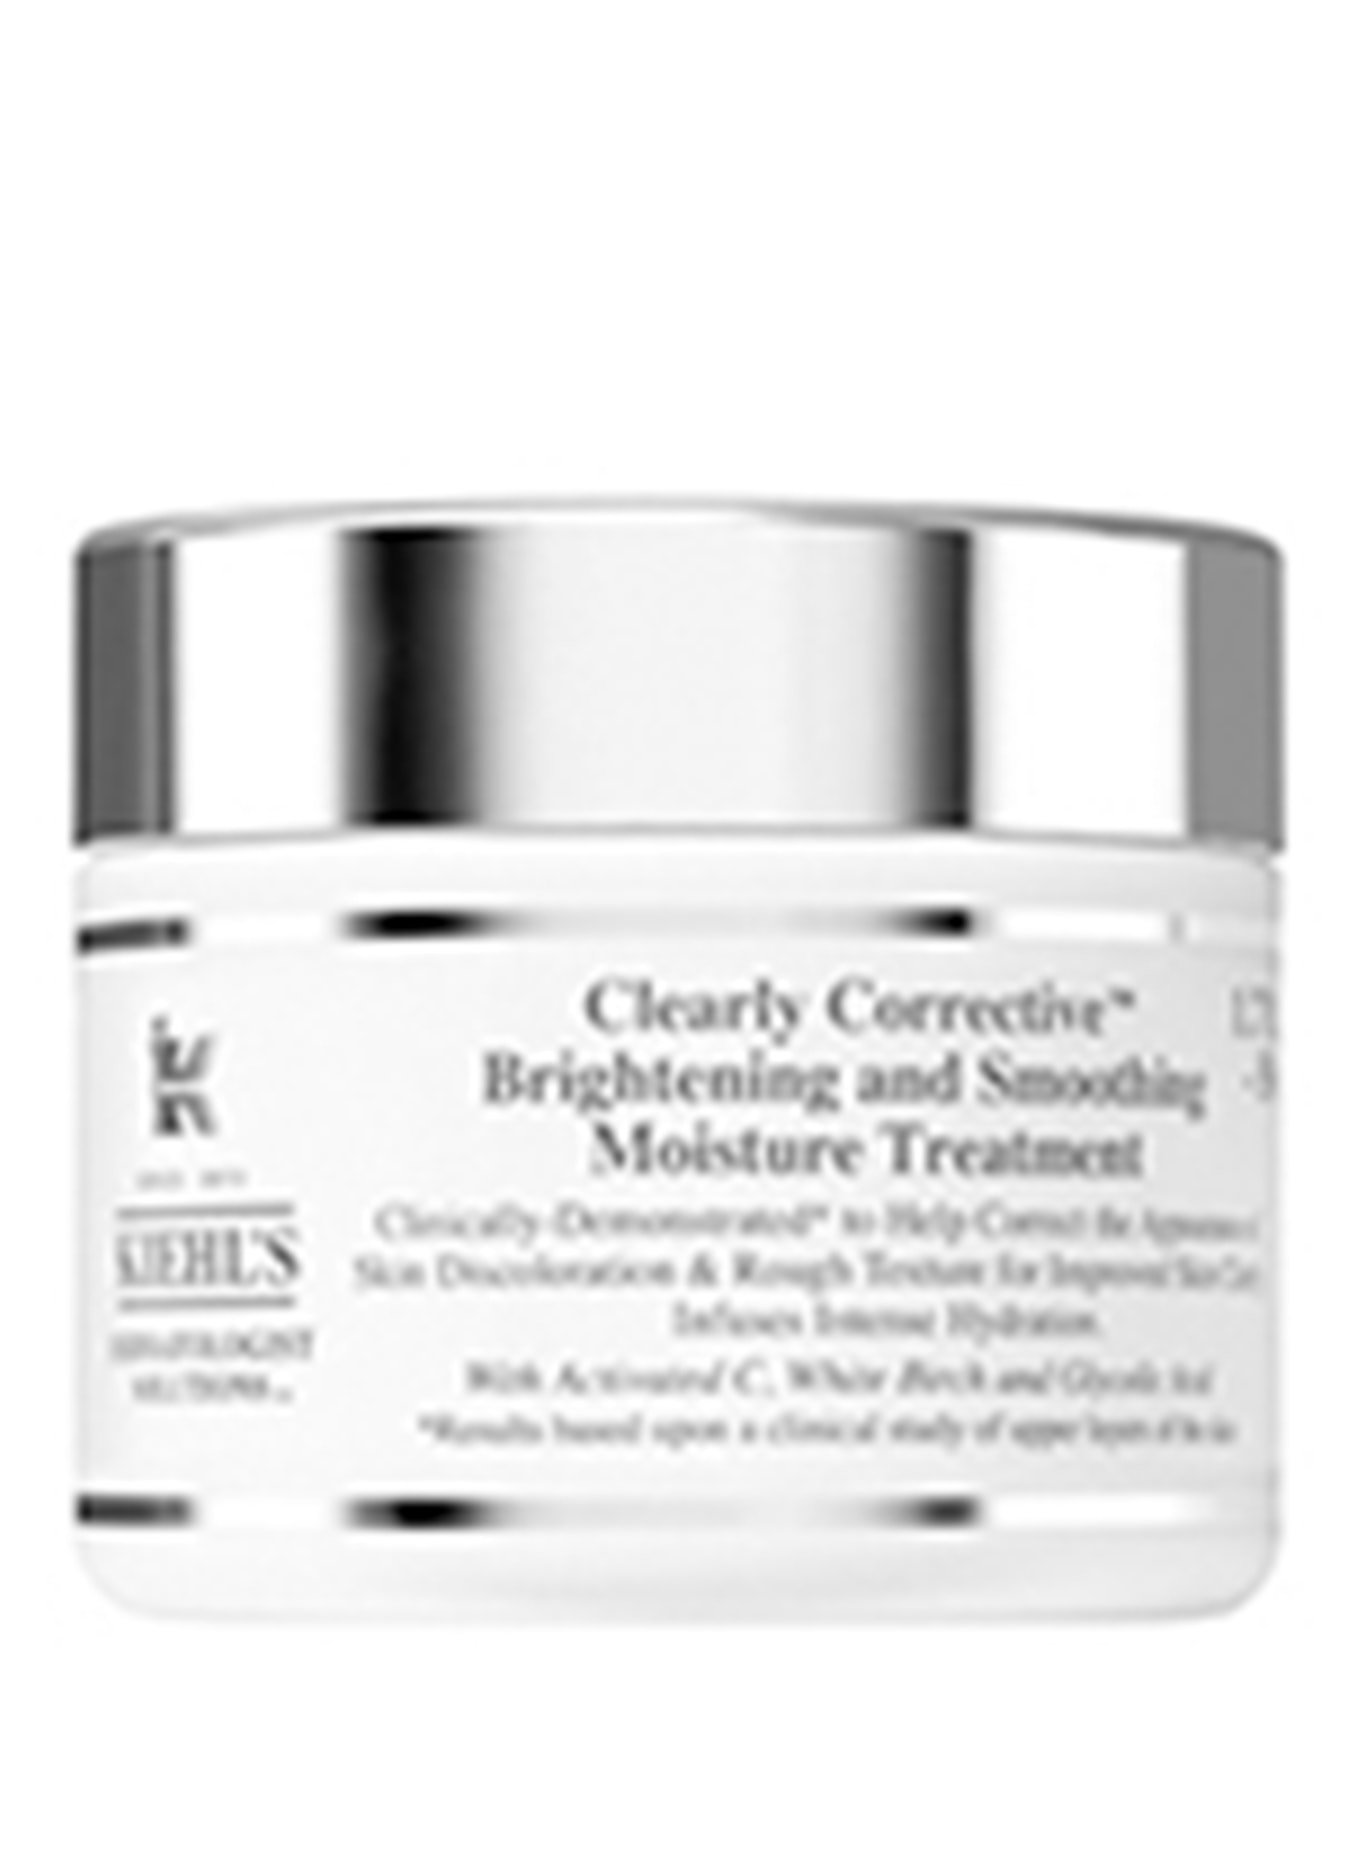 Kiehl's CLEARLY CORRECTIVE™ BRIGHTENING & SMOOTHING TREATMENT (Obrázek 1)